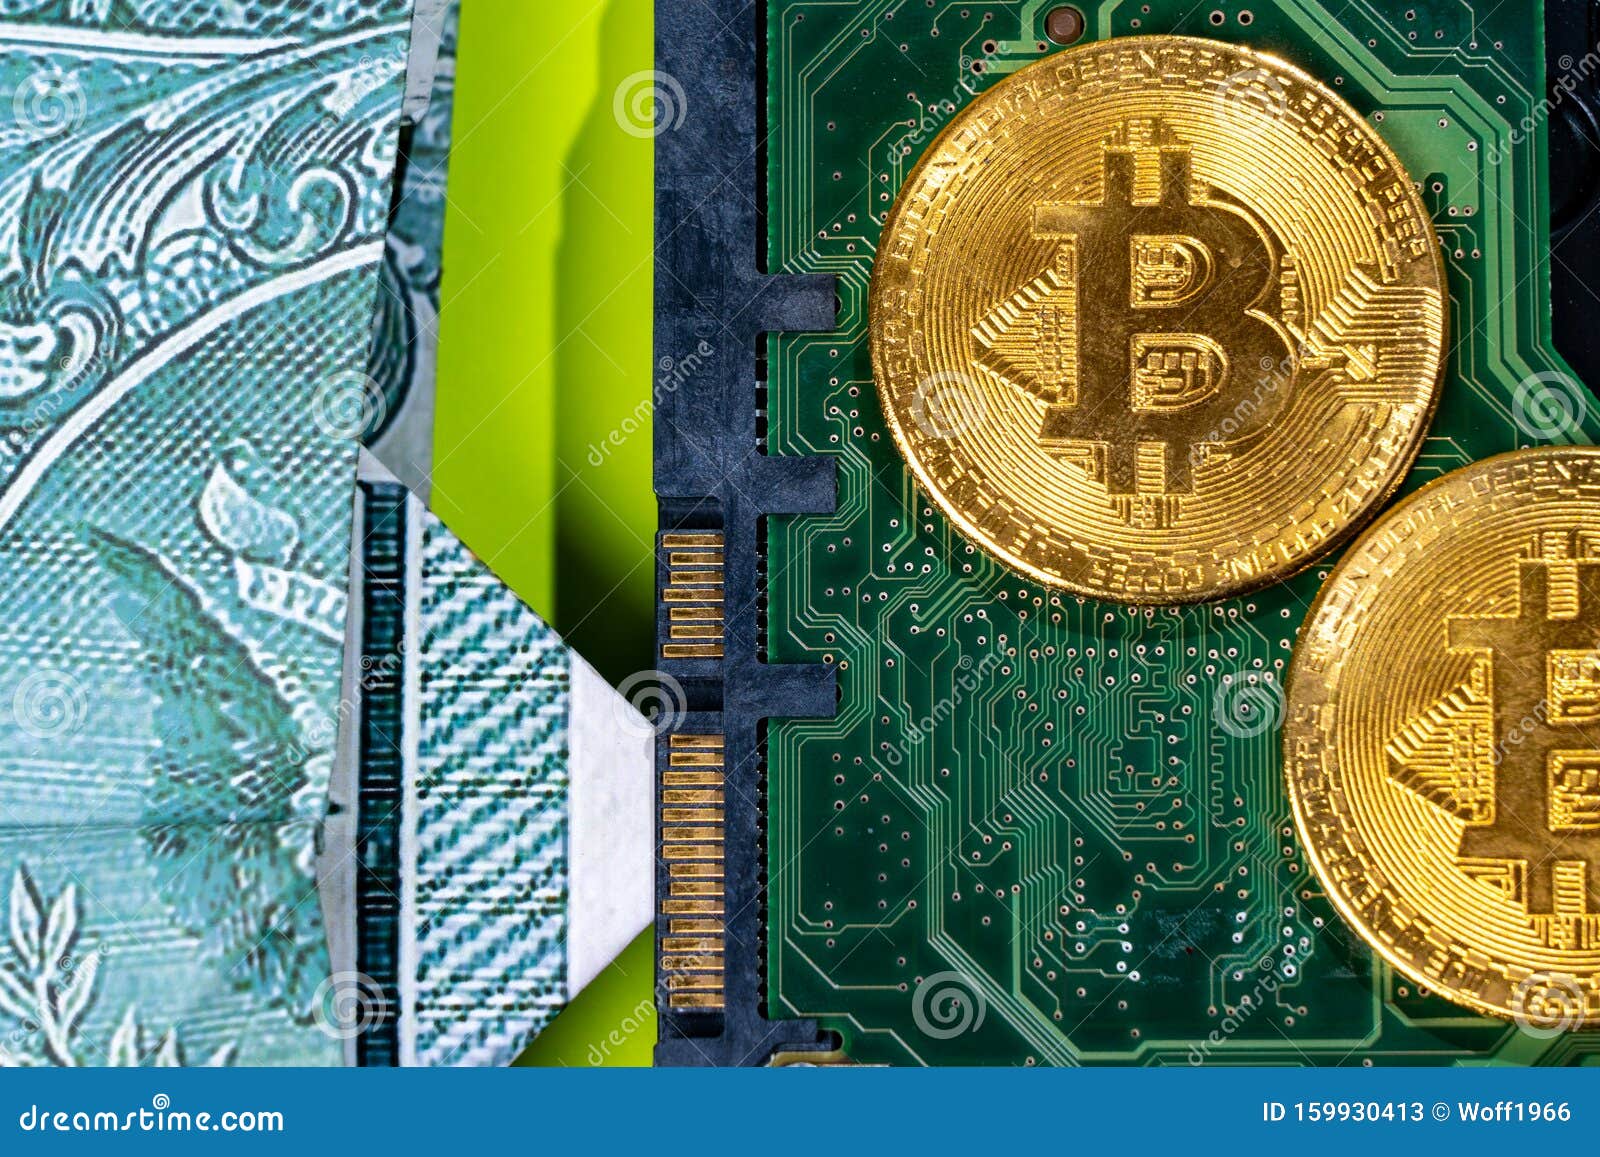 Concept Of Bitcoin Mining. A Little Miner Is Digging For Bitcoin With Graphic Card Dollars ...